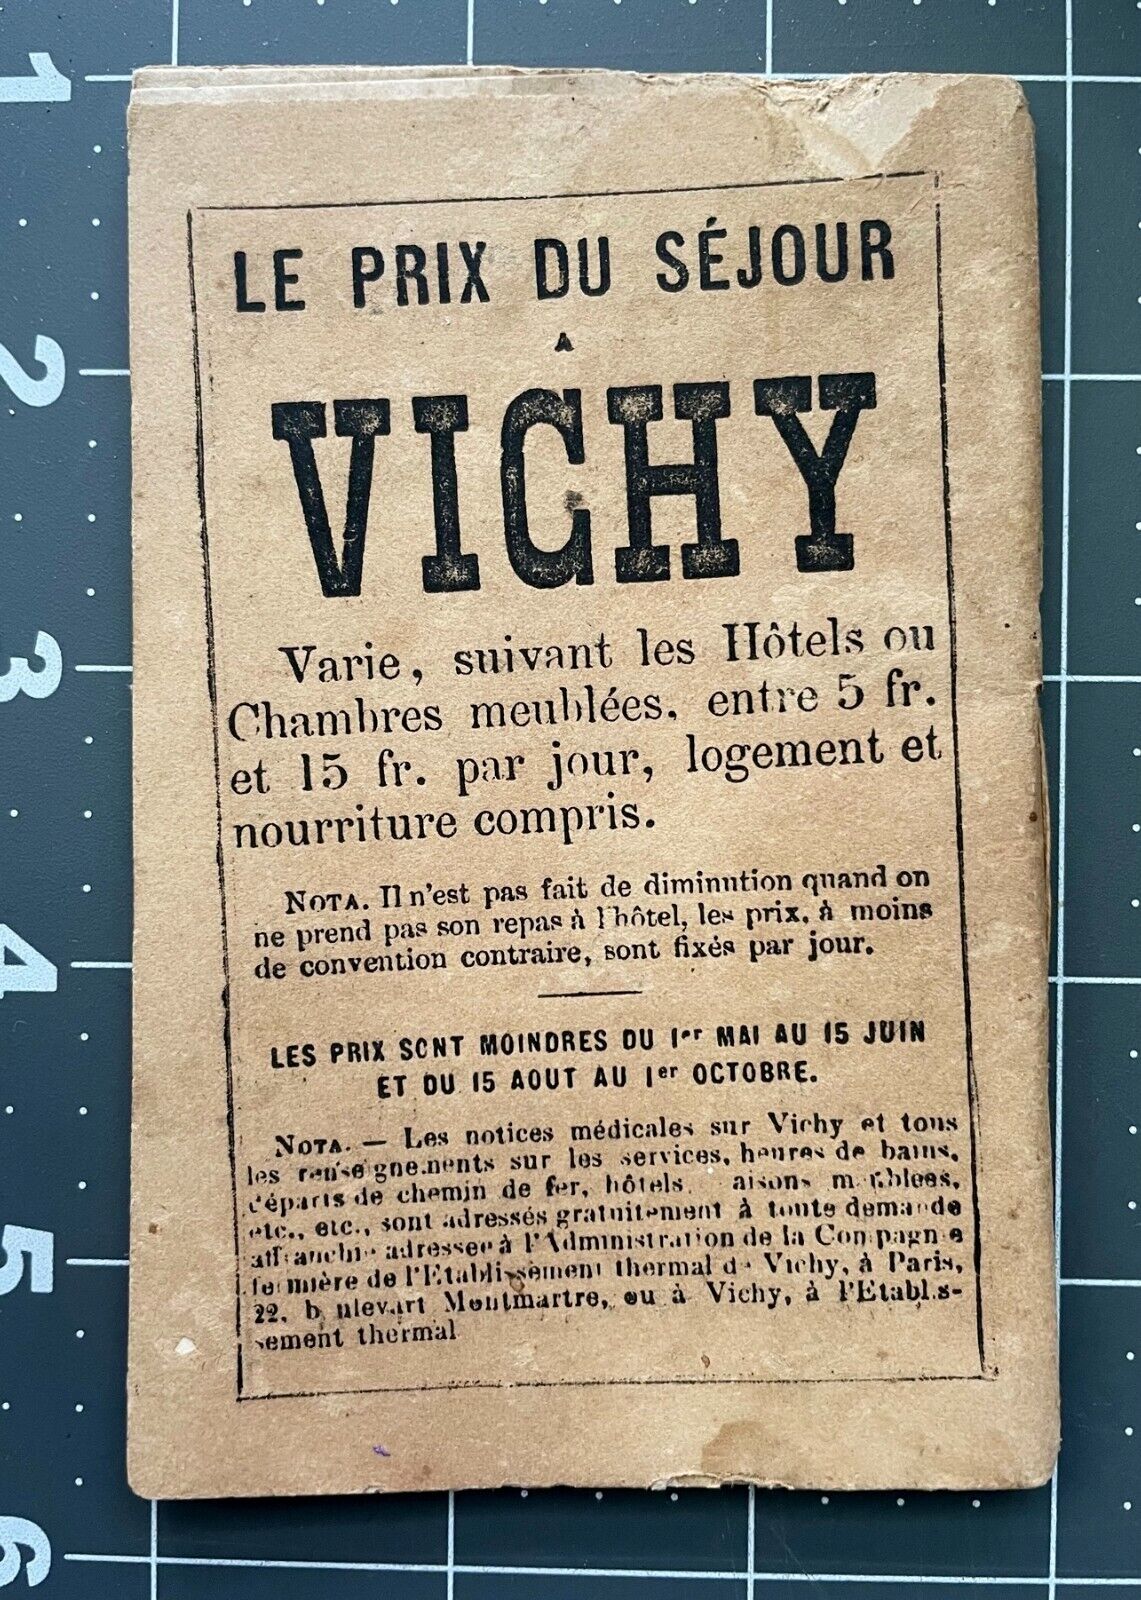 1865 Saison Guide to Thermal Water Establishments of Vichy France